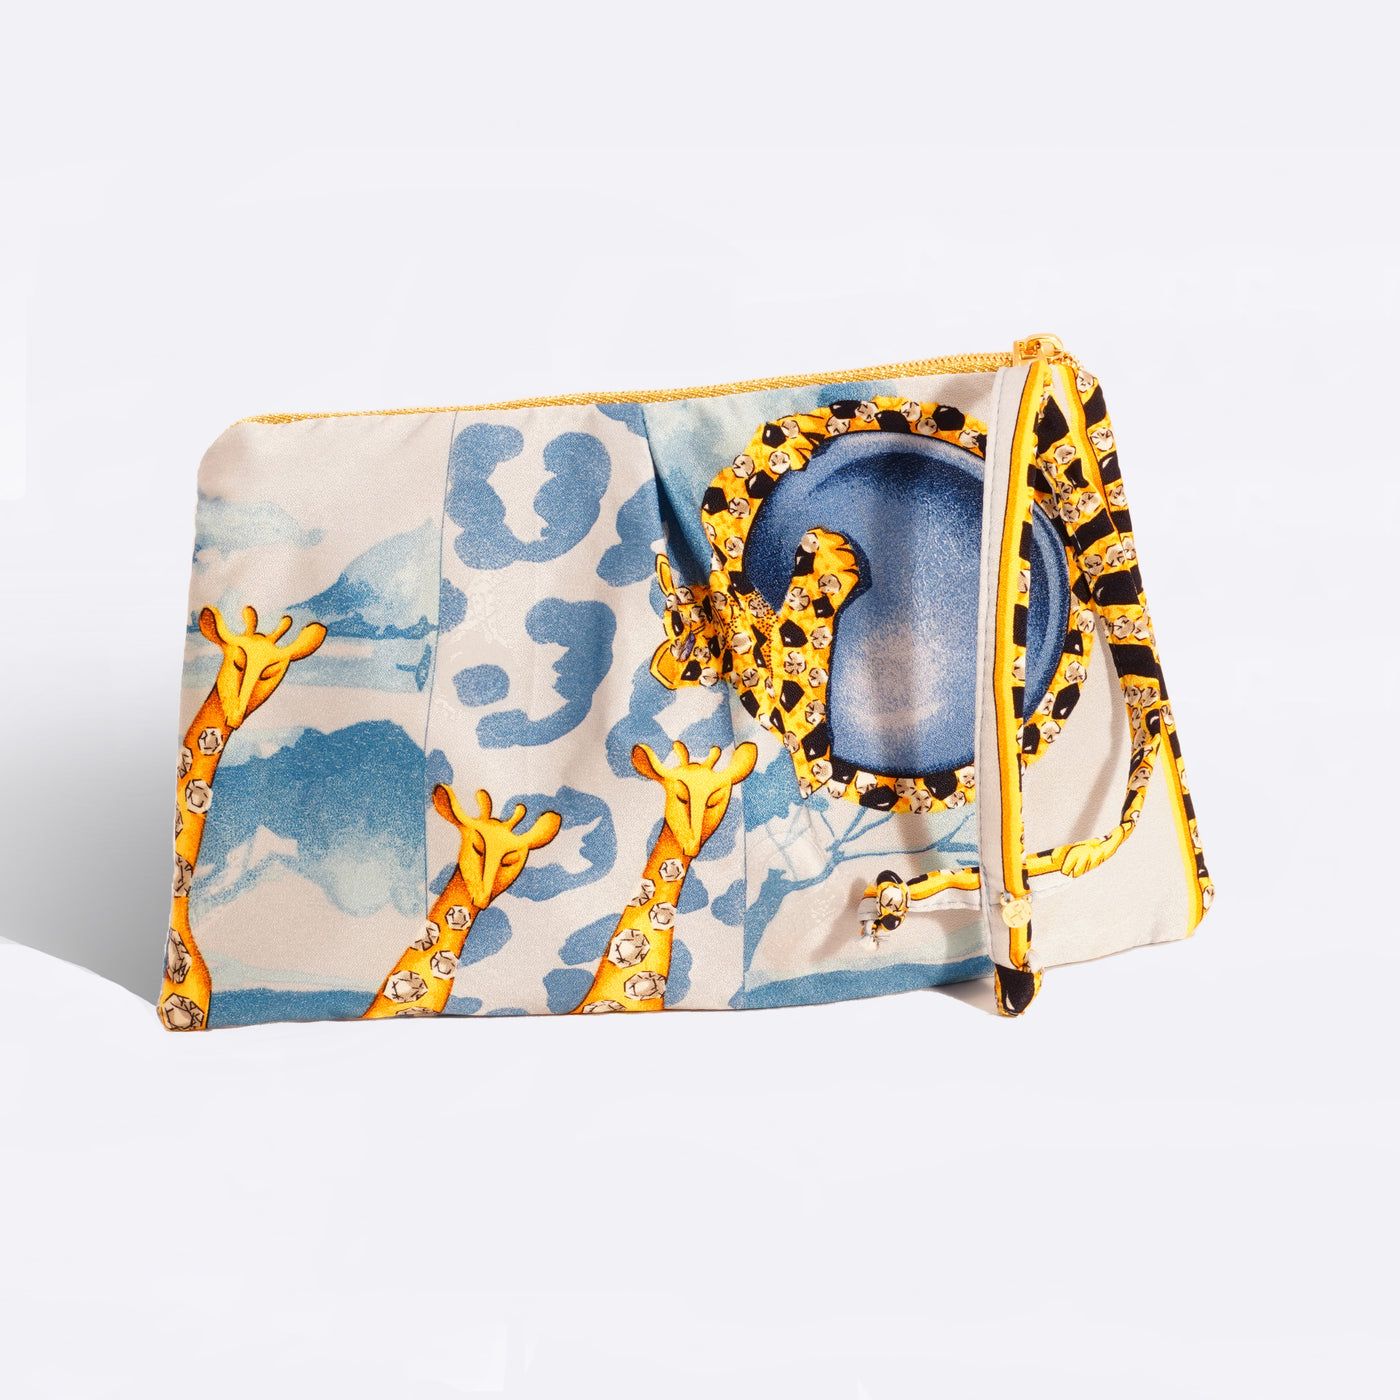 "Out of Africa" Scarf Bag (Upcycled from Cartier Scarf) Party Clutch Hampton Road Designs   